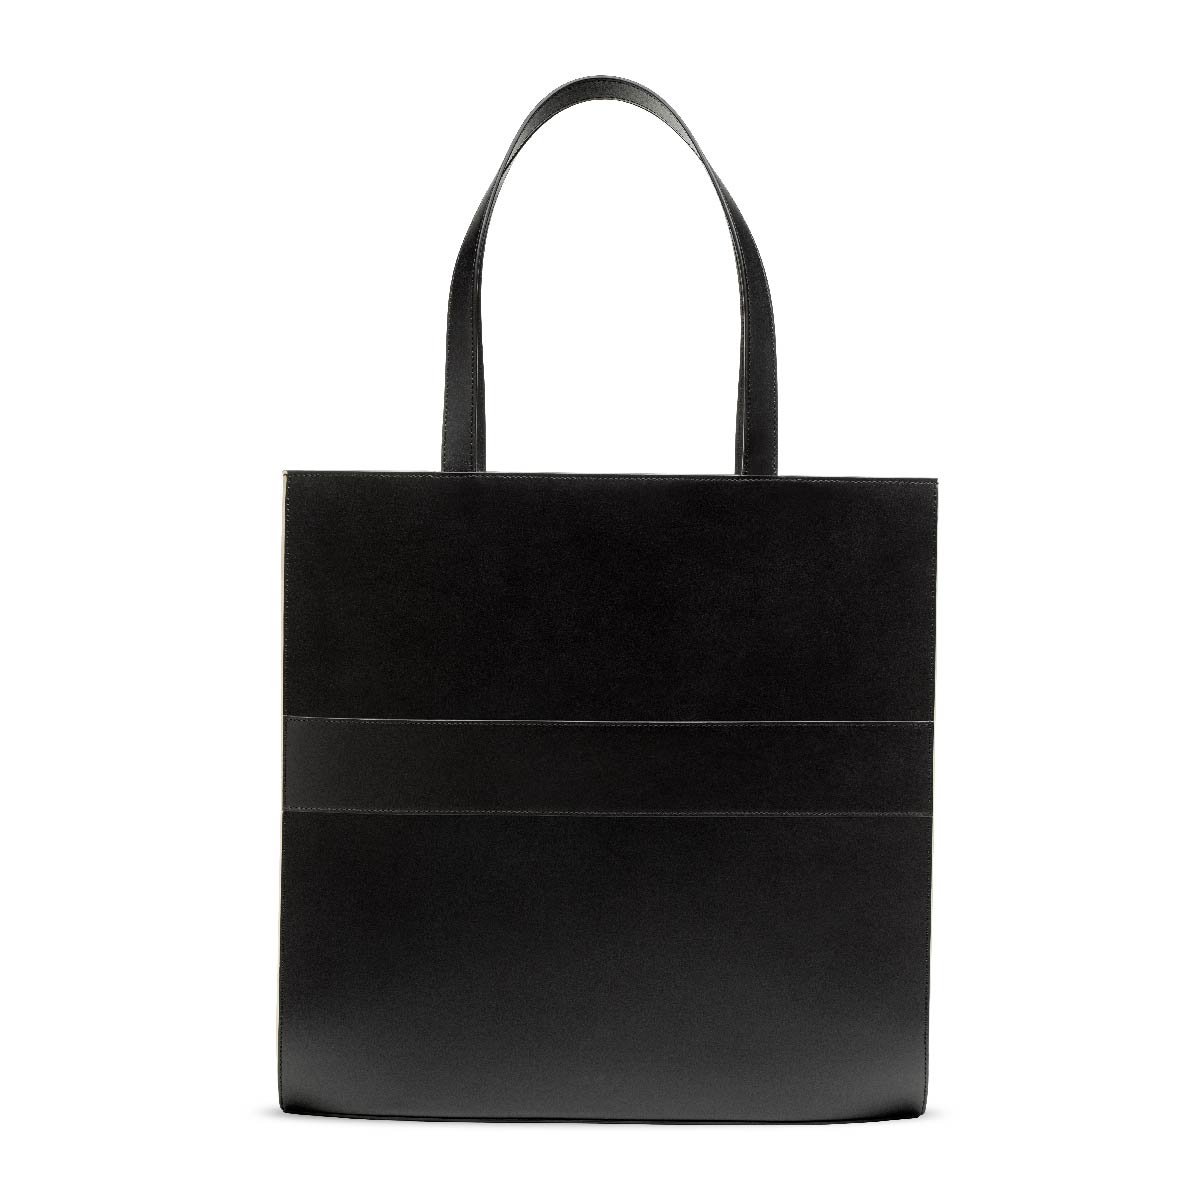 The Tote in Black + Cream, with top handles, back view.